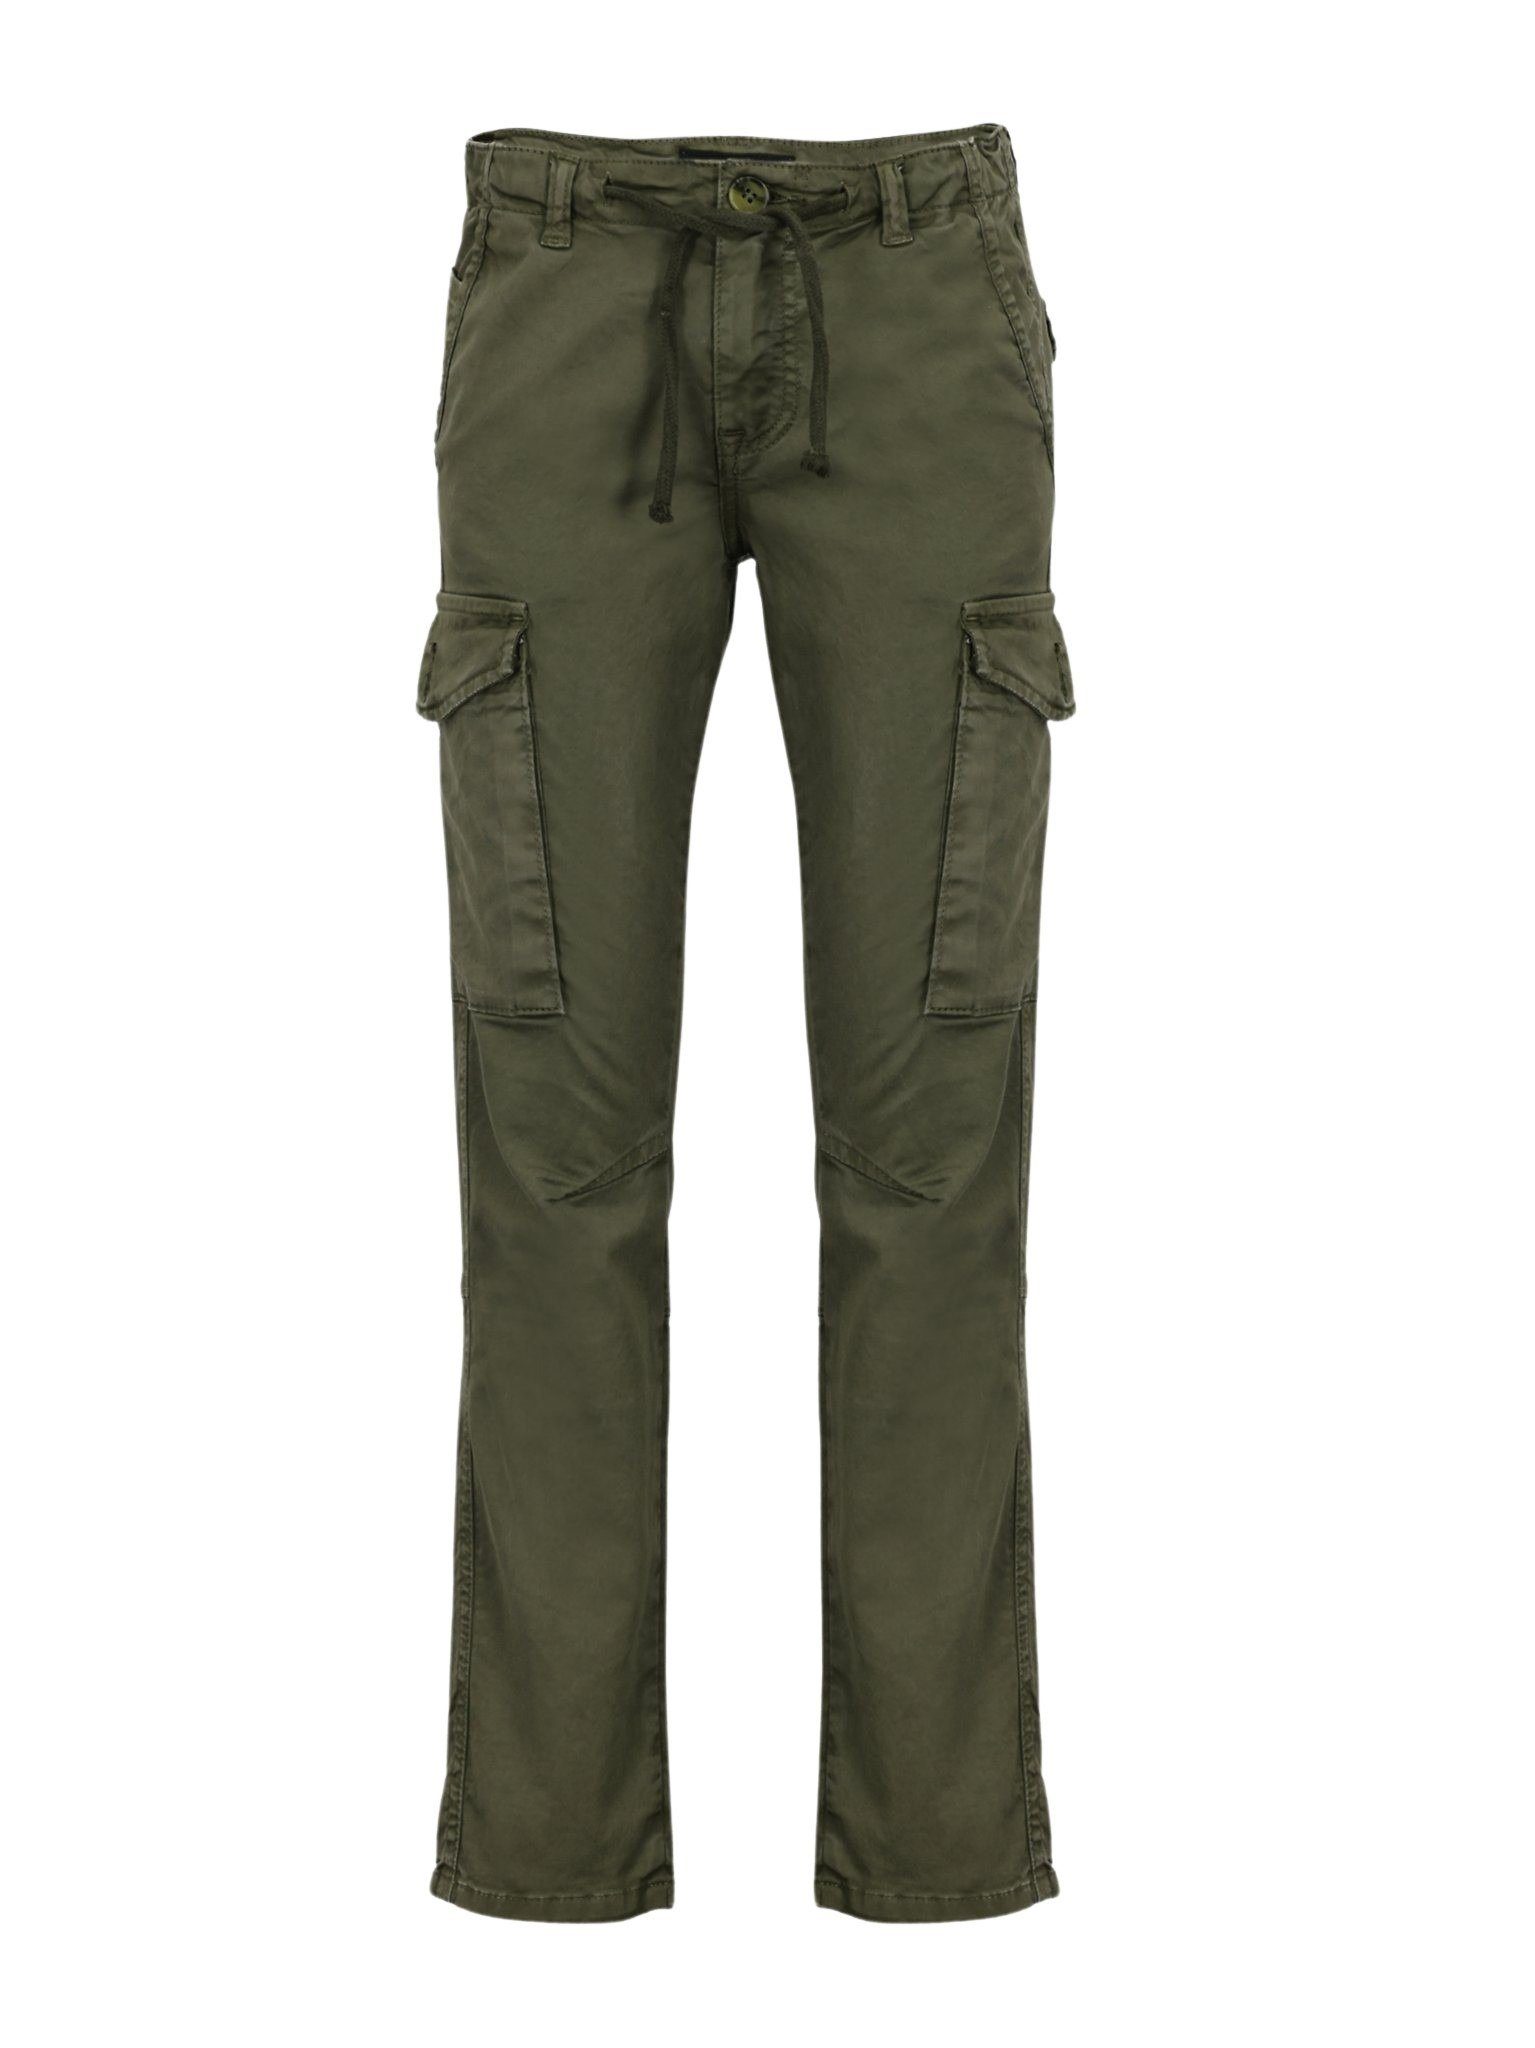 LTB Outdoorhose LTB Gebozo Dusty Olive Pants